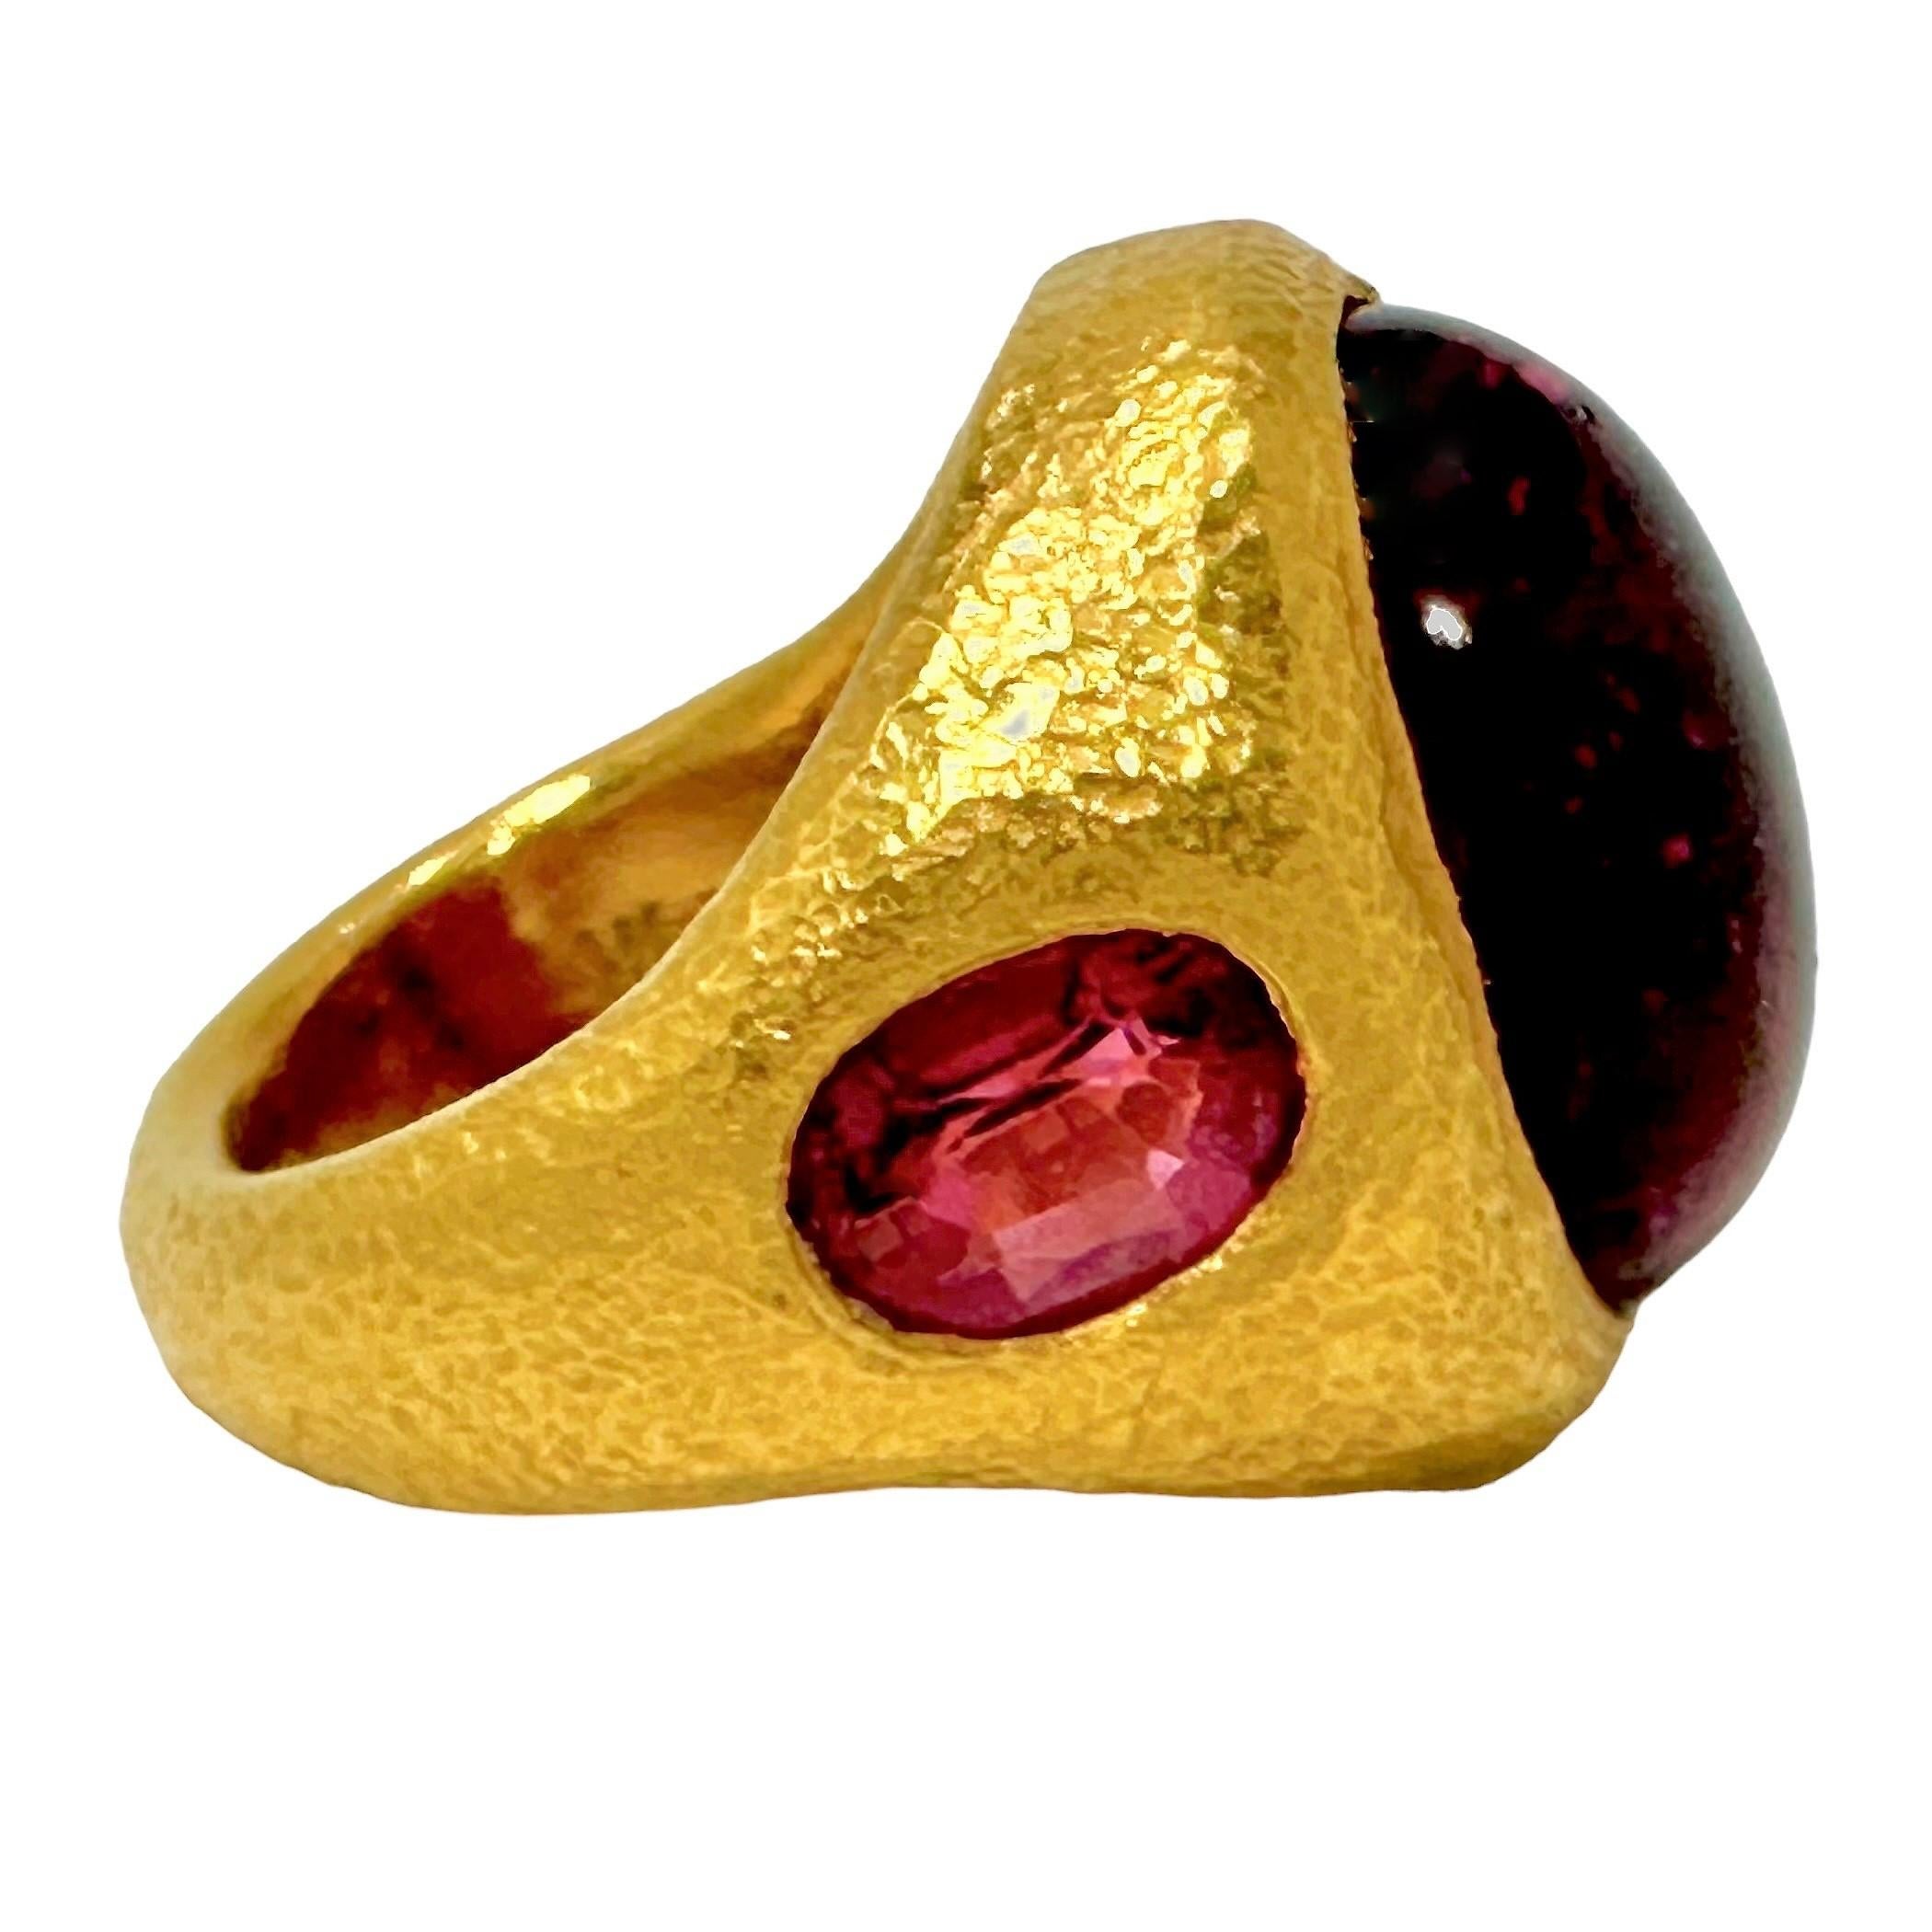 Cabochon Vintage 24k Gold Hammered Finish Ring with Rubellite Tourmalines by Pisani